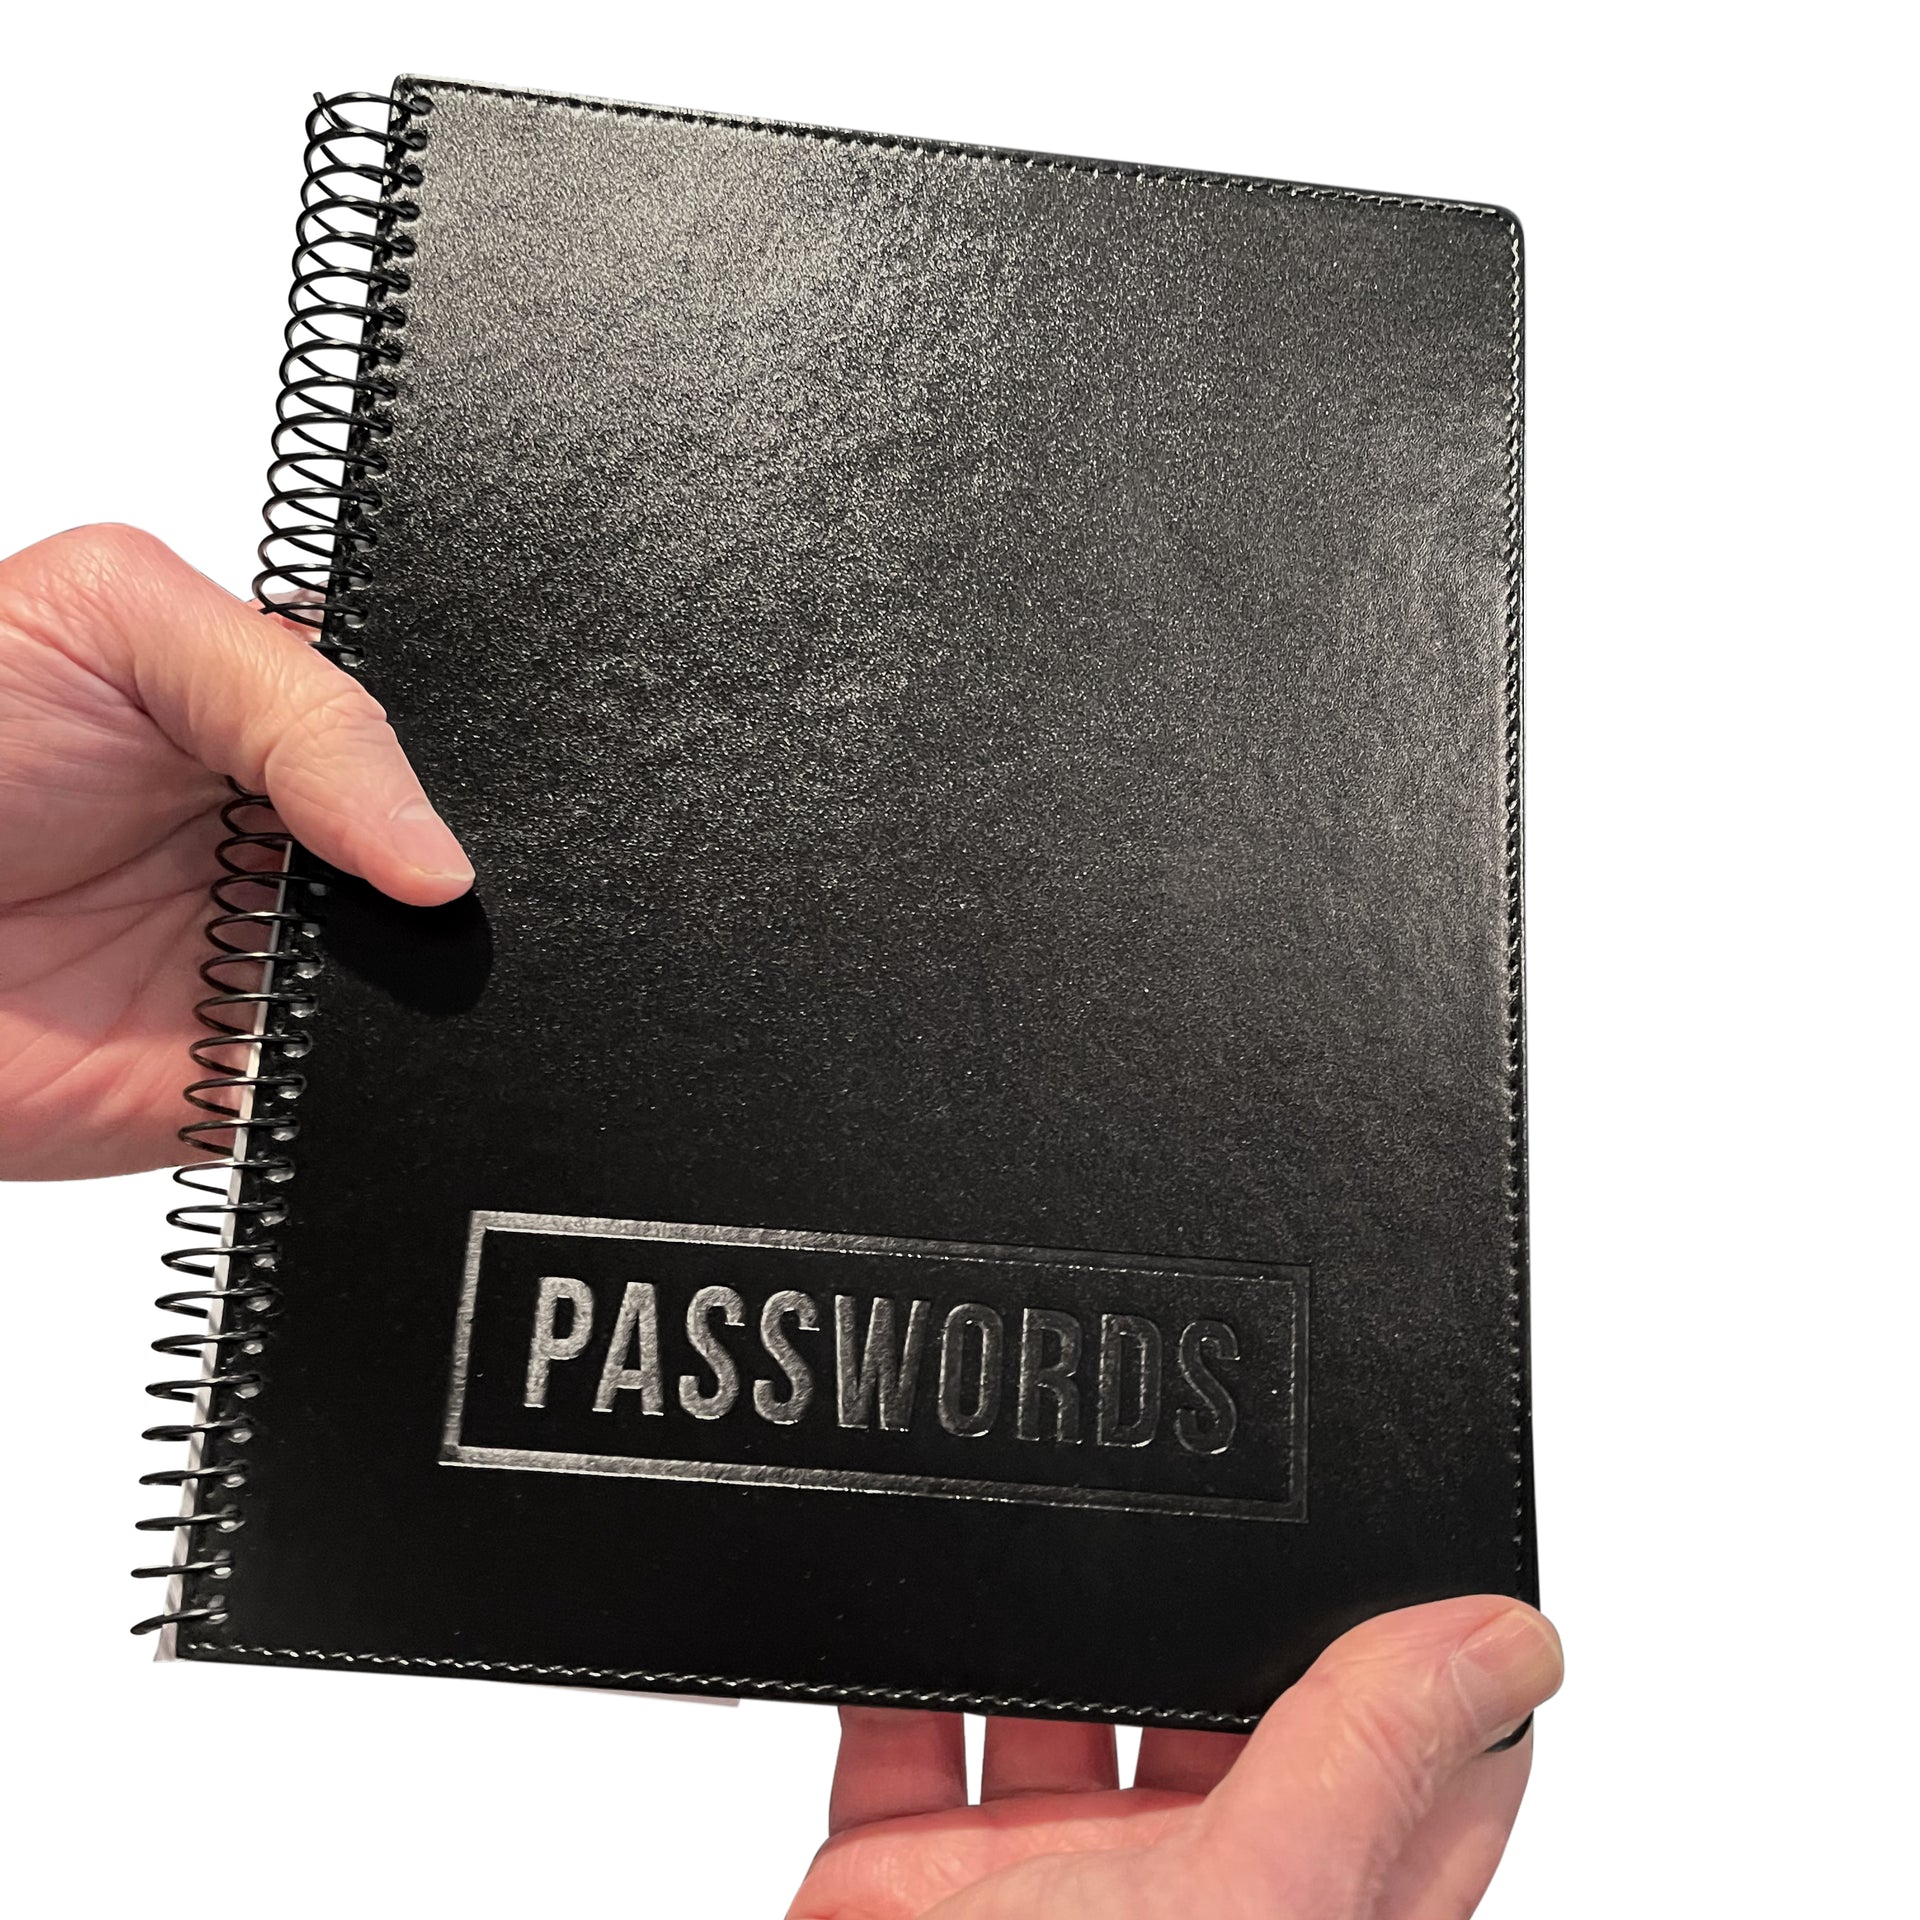 RE-FOCUS THE CREATIVE OFFICE, Executive Black Password Keeper Book, Flexible Faux-Leather Cover